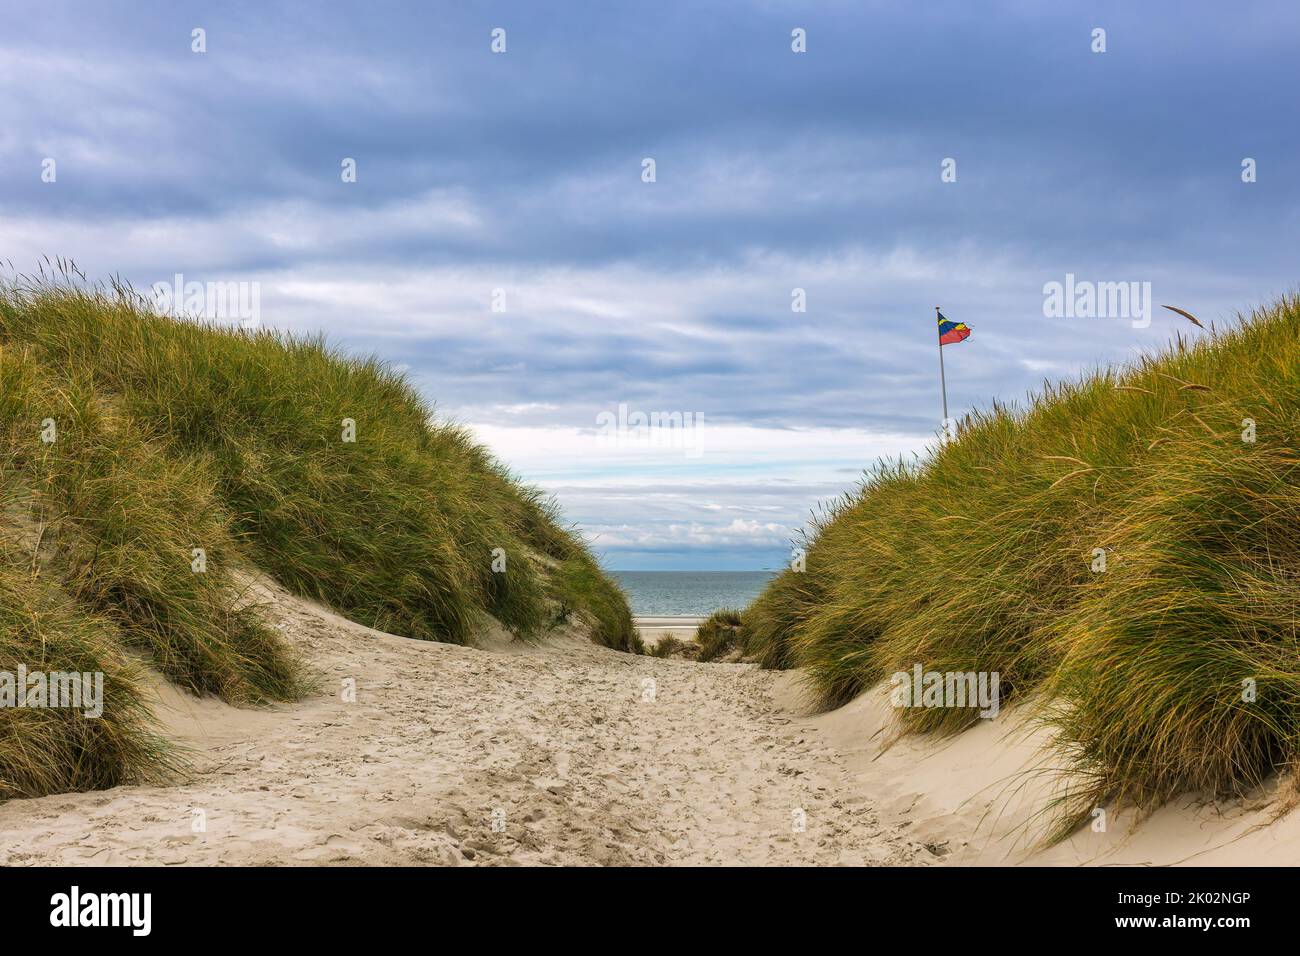 Landscape in the dunes on the North Sea island Amrum, Germany. Stock Photo